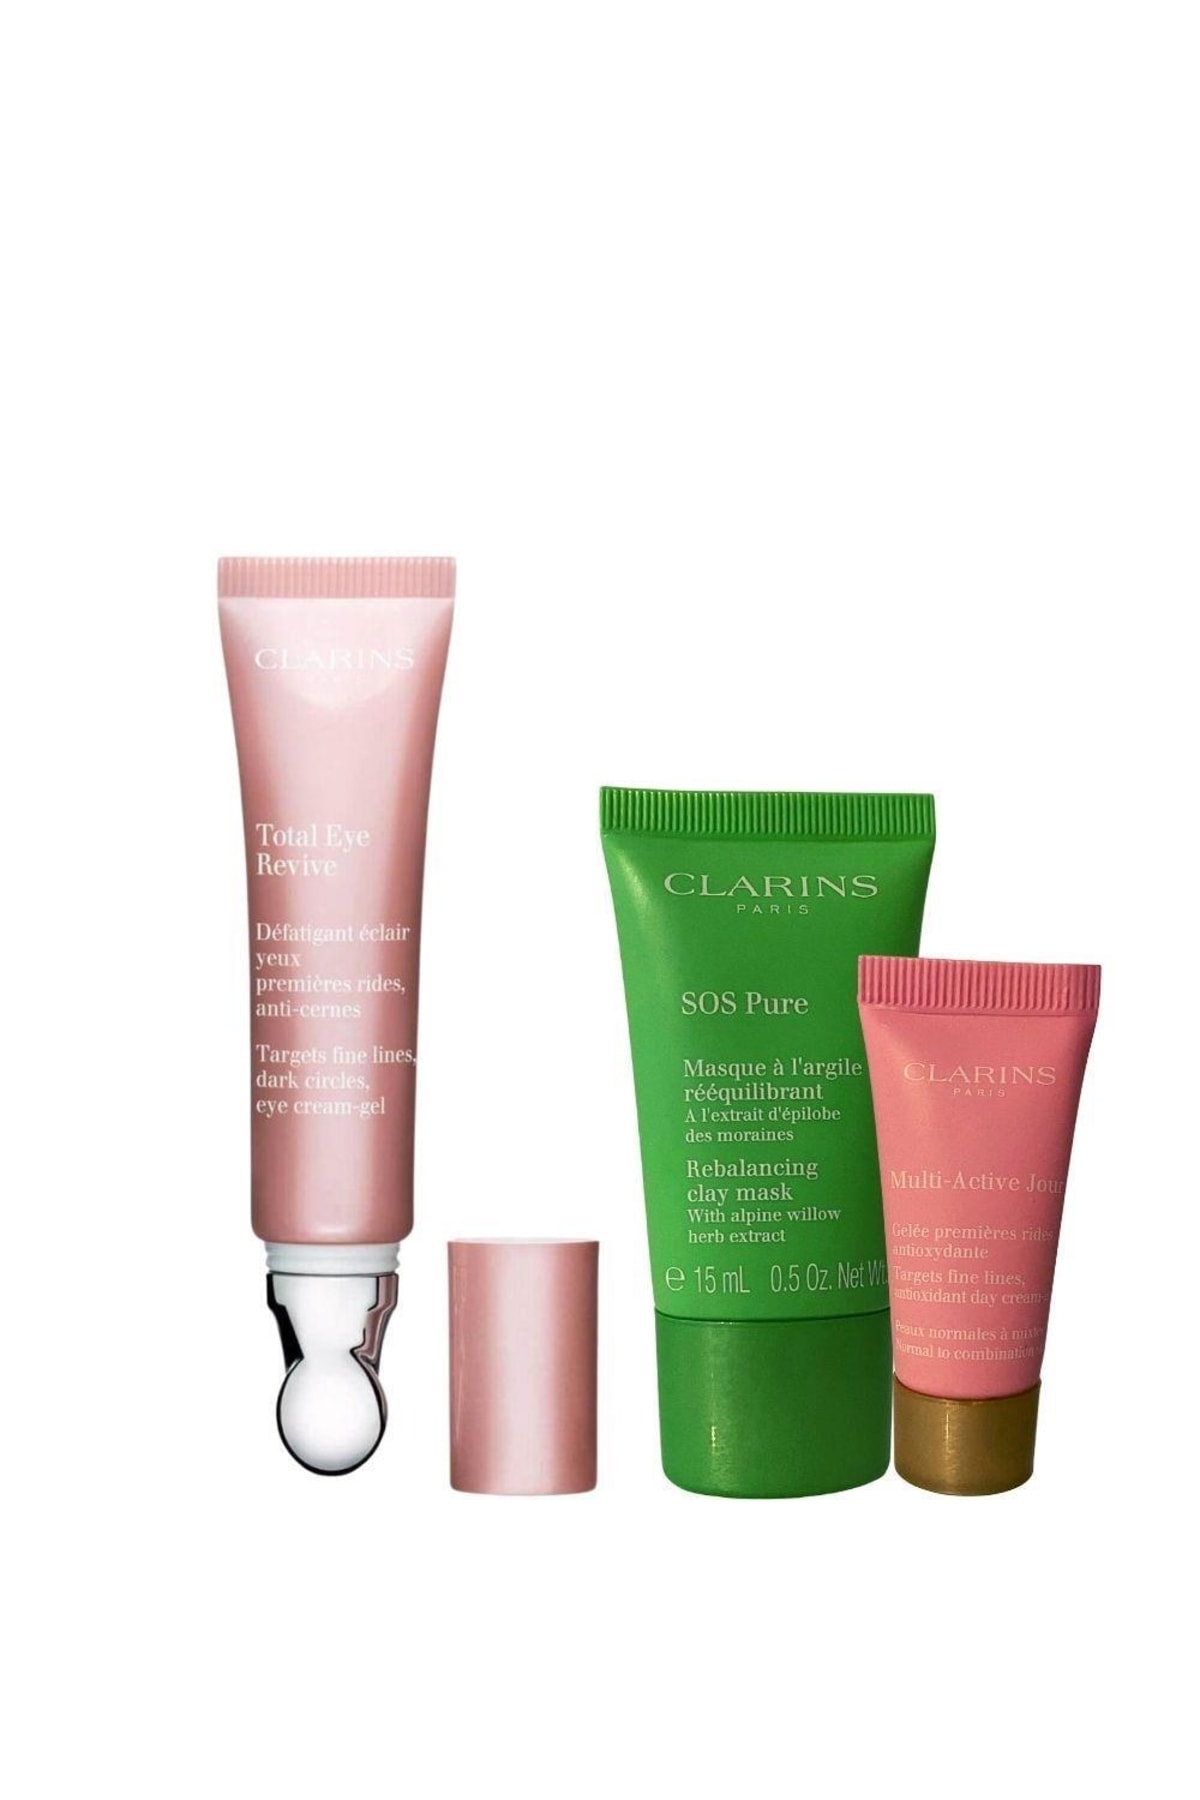 Clarins Total Eye Revive 15 Ml + Sos Pure Rebalancing Clay Mask 15ml + Multi Active Jour Day Cream G